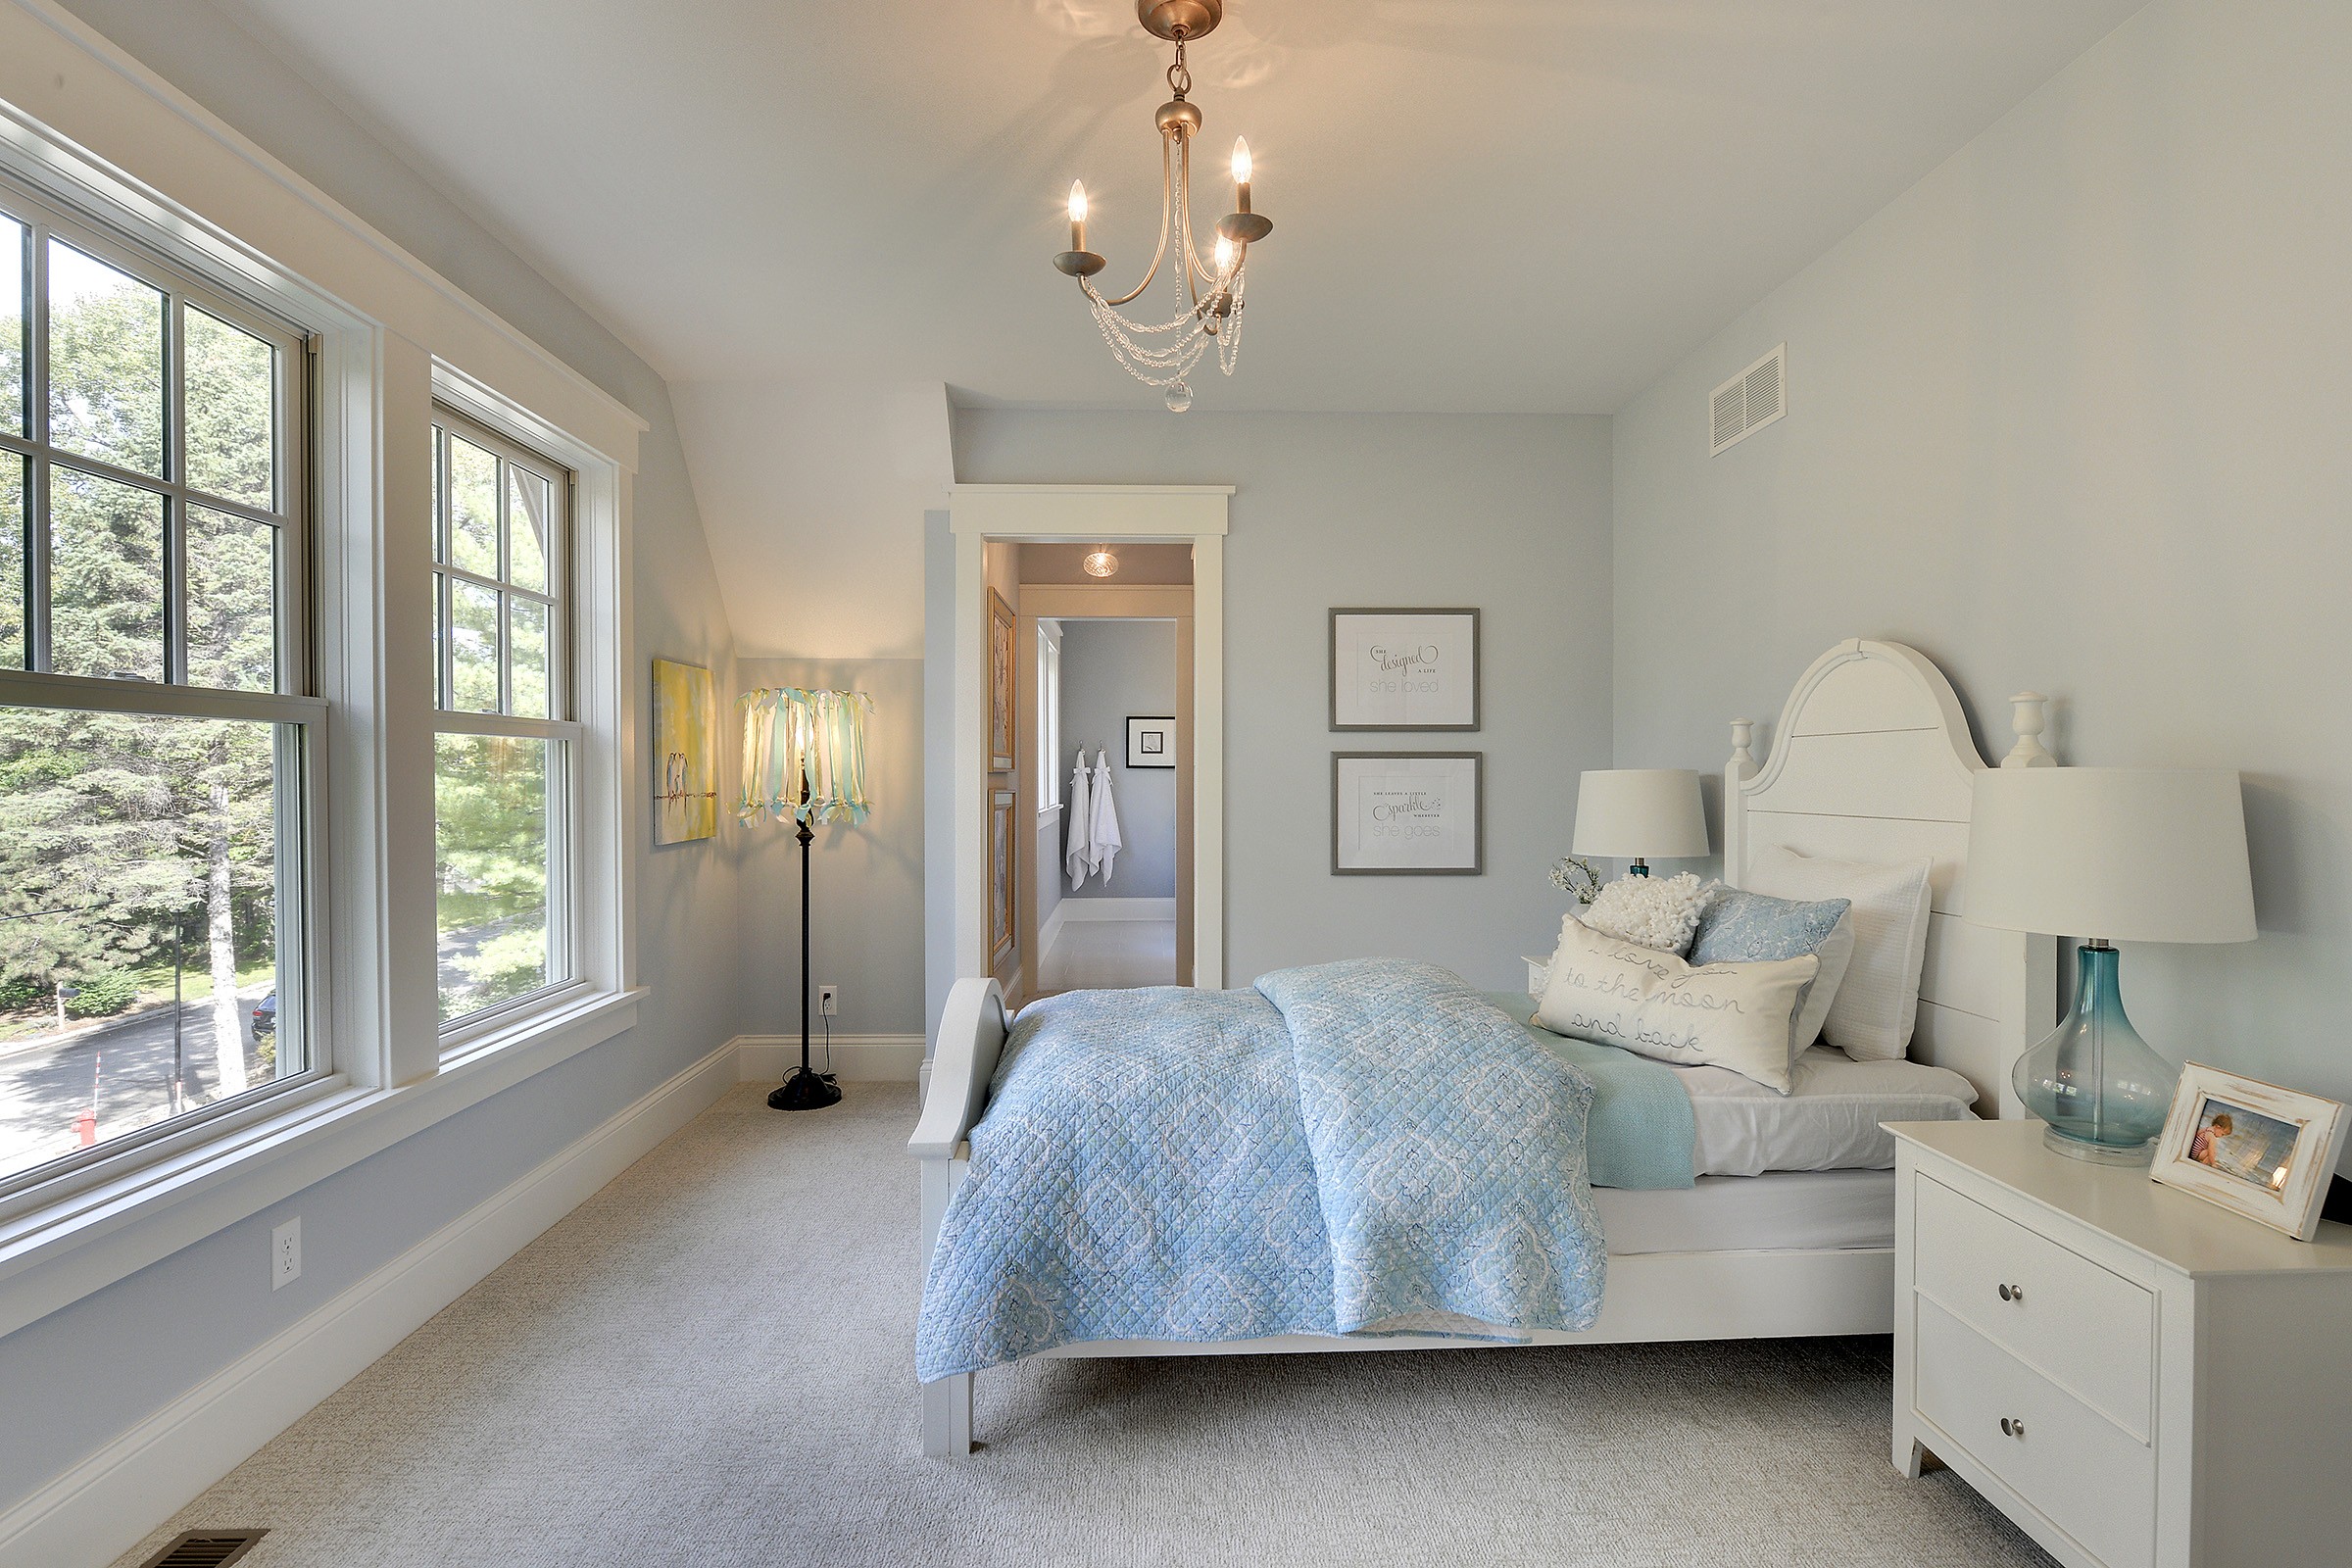 Pastel blue bedroom with white trim and furniture, elegant blue glass lighting and decorations.